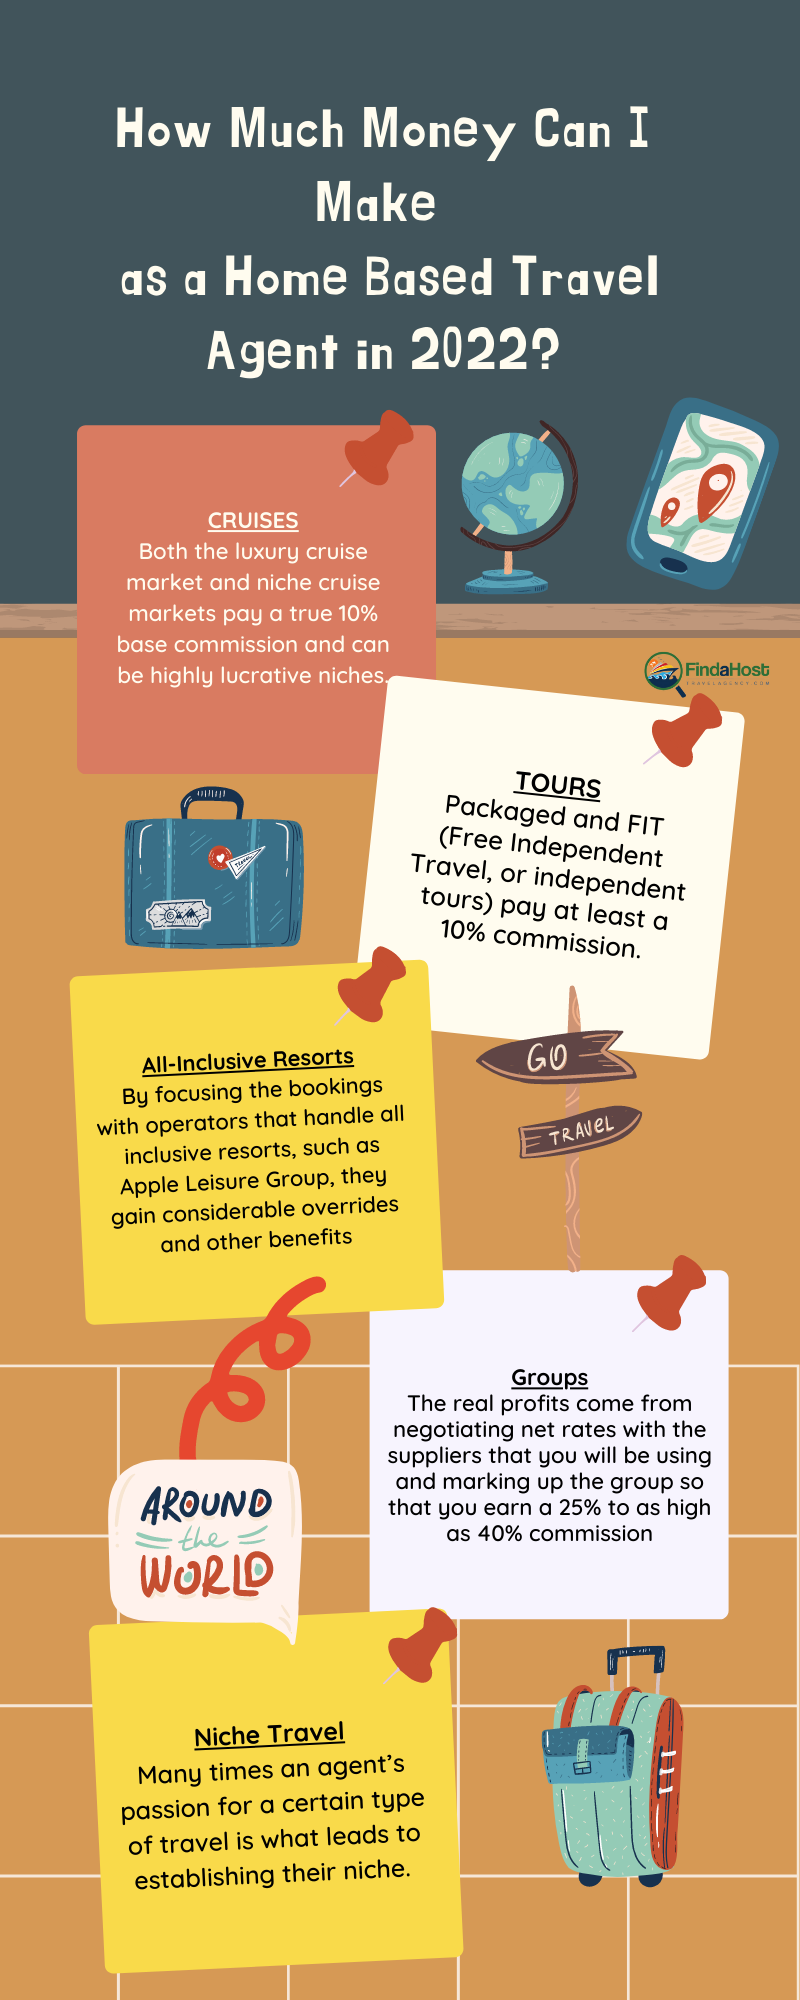 How-Much-Money-Can-I-Make-as-a-Home-Based-Travel-Agent-in-2022-Infographic-1-FAHTA